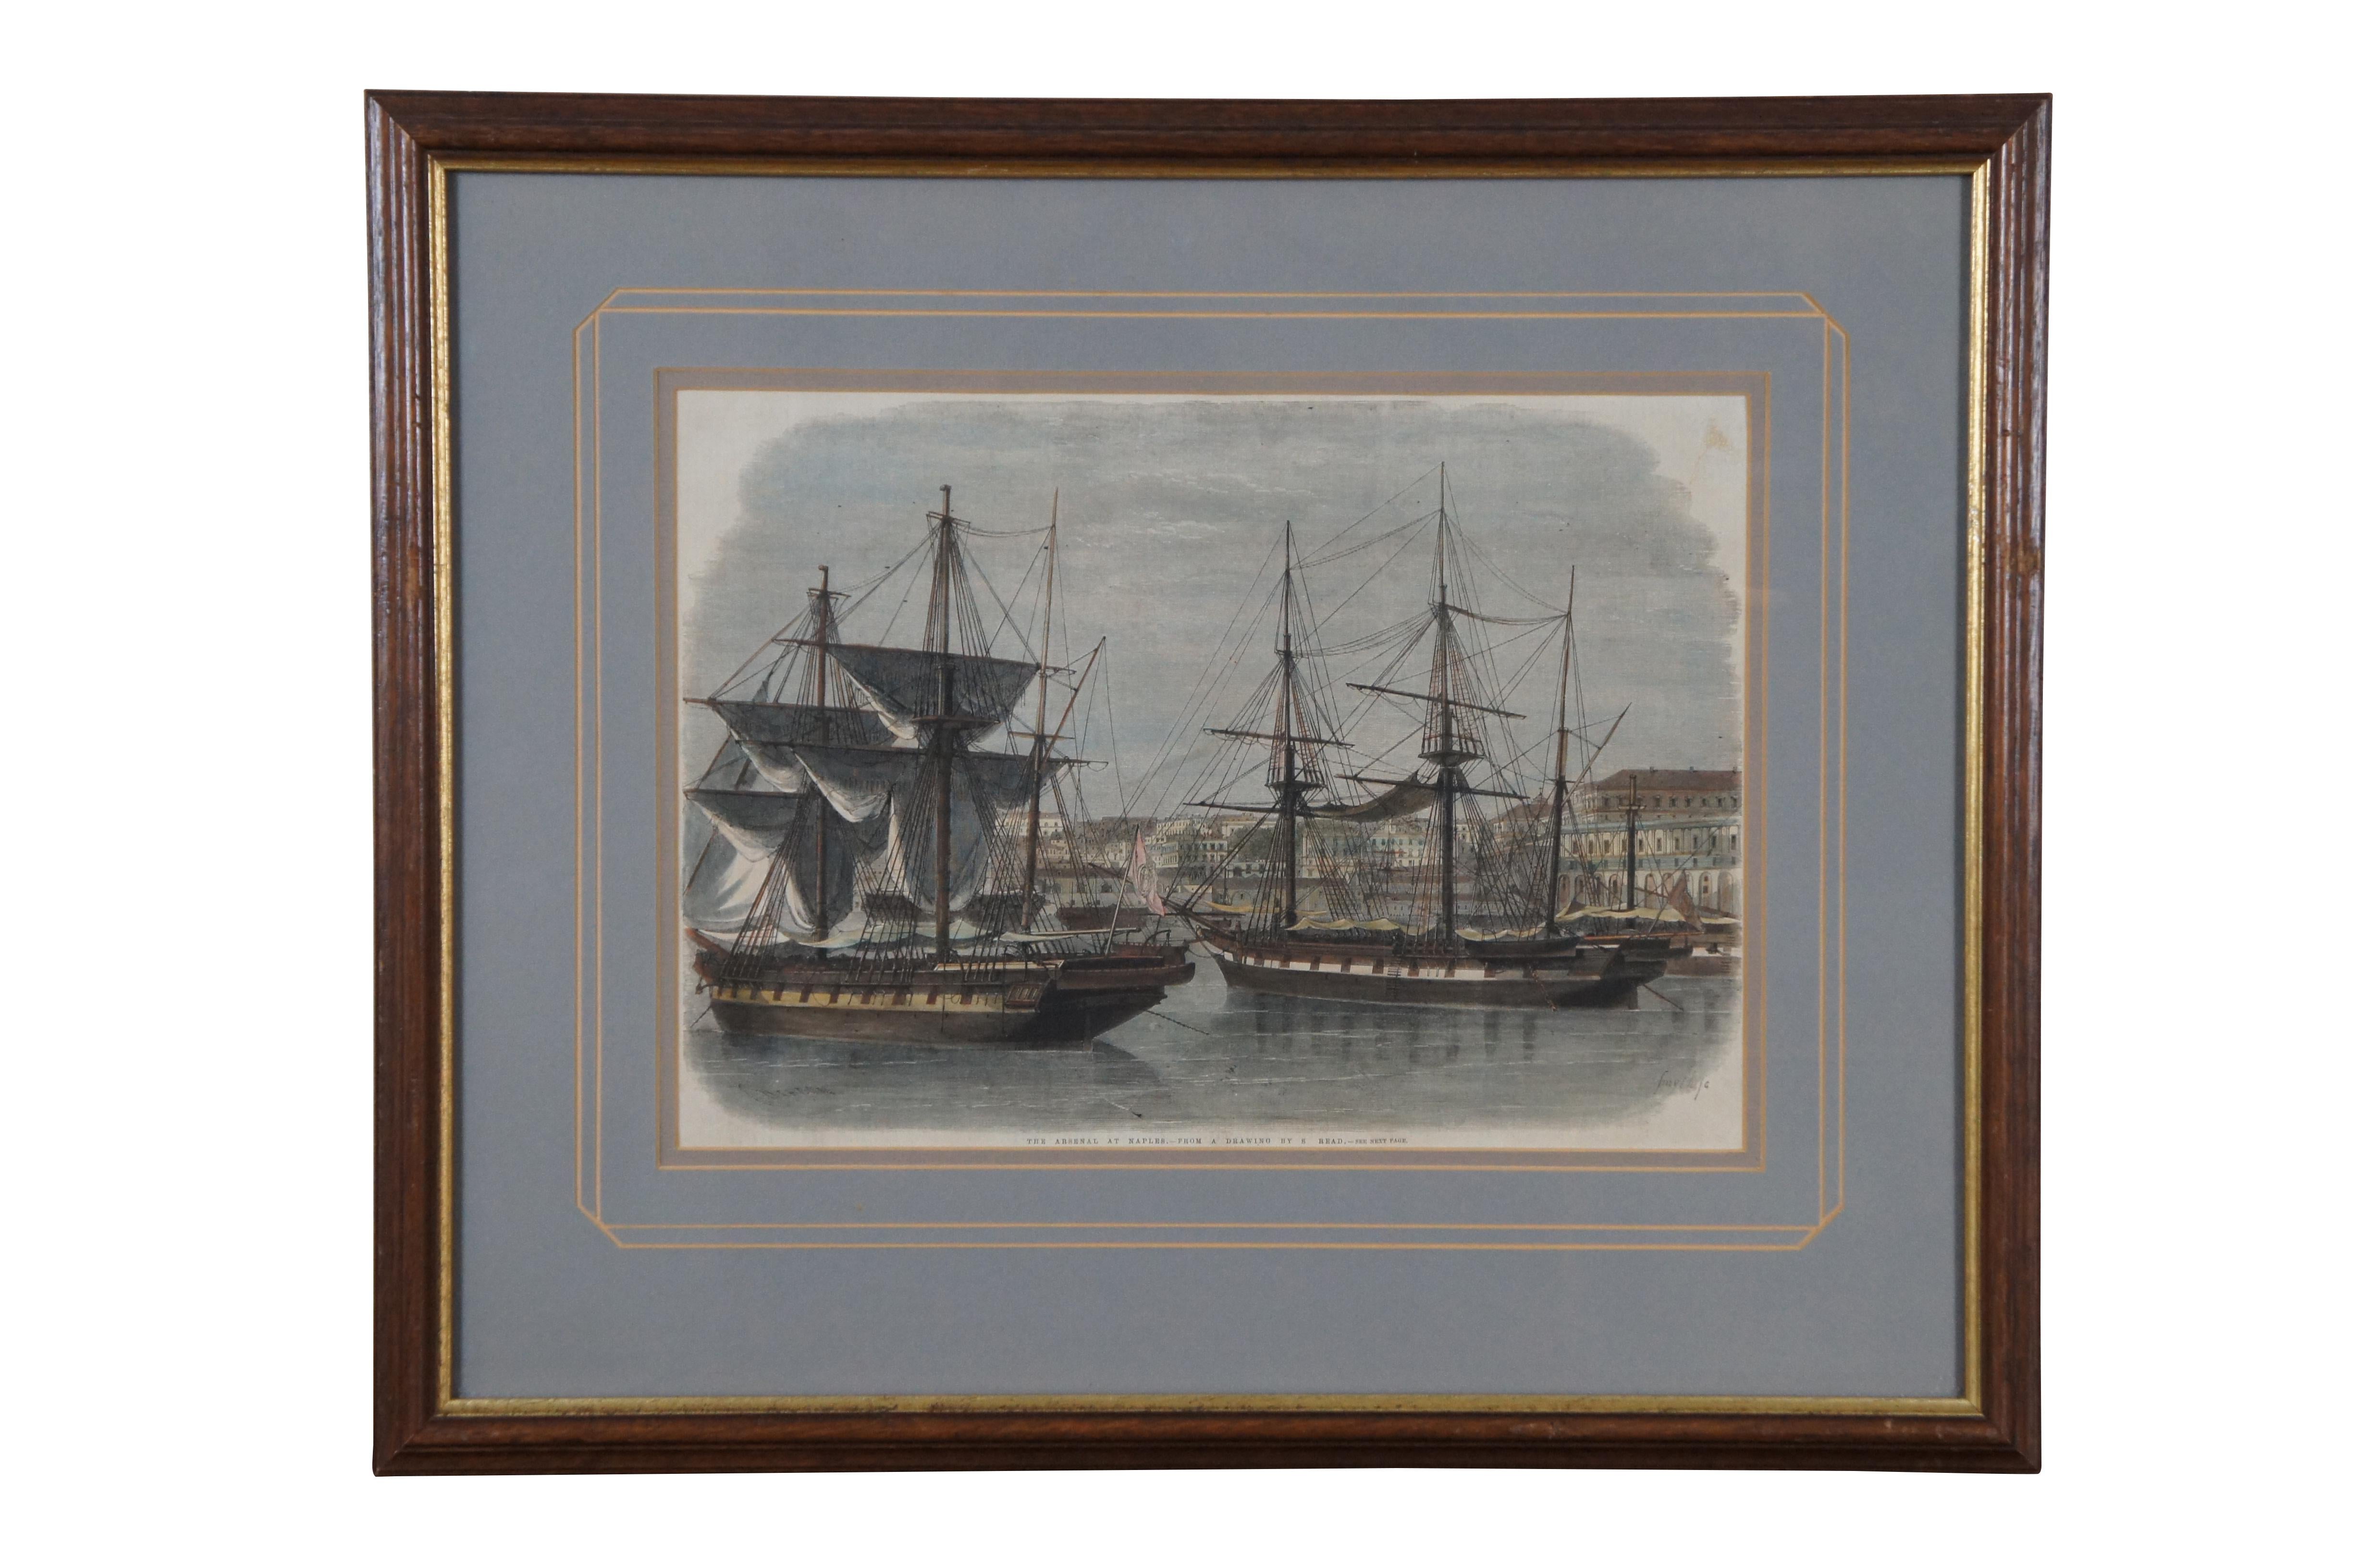 Pair of antique hand colored boat / ship / Galleon engravings depicting “The Arsenal at Naples – From a Drawing by S. Read” and “Her Majesty the Queen Leaving Greenhithe in the Royal Yacht for Germany” from The Illustrated London News, by Frederick